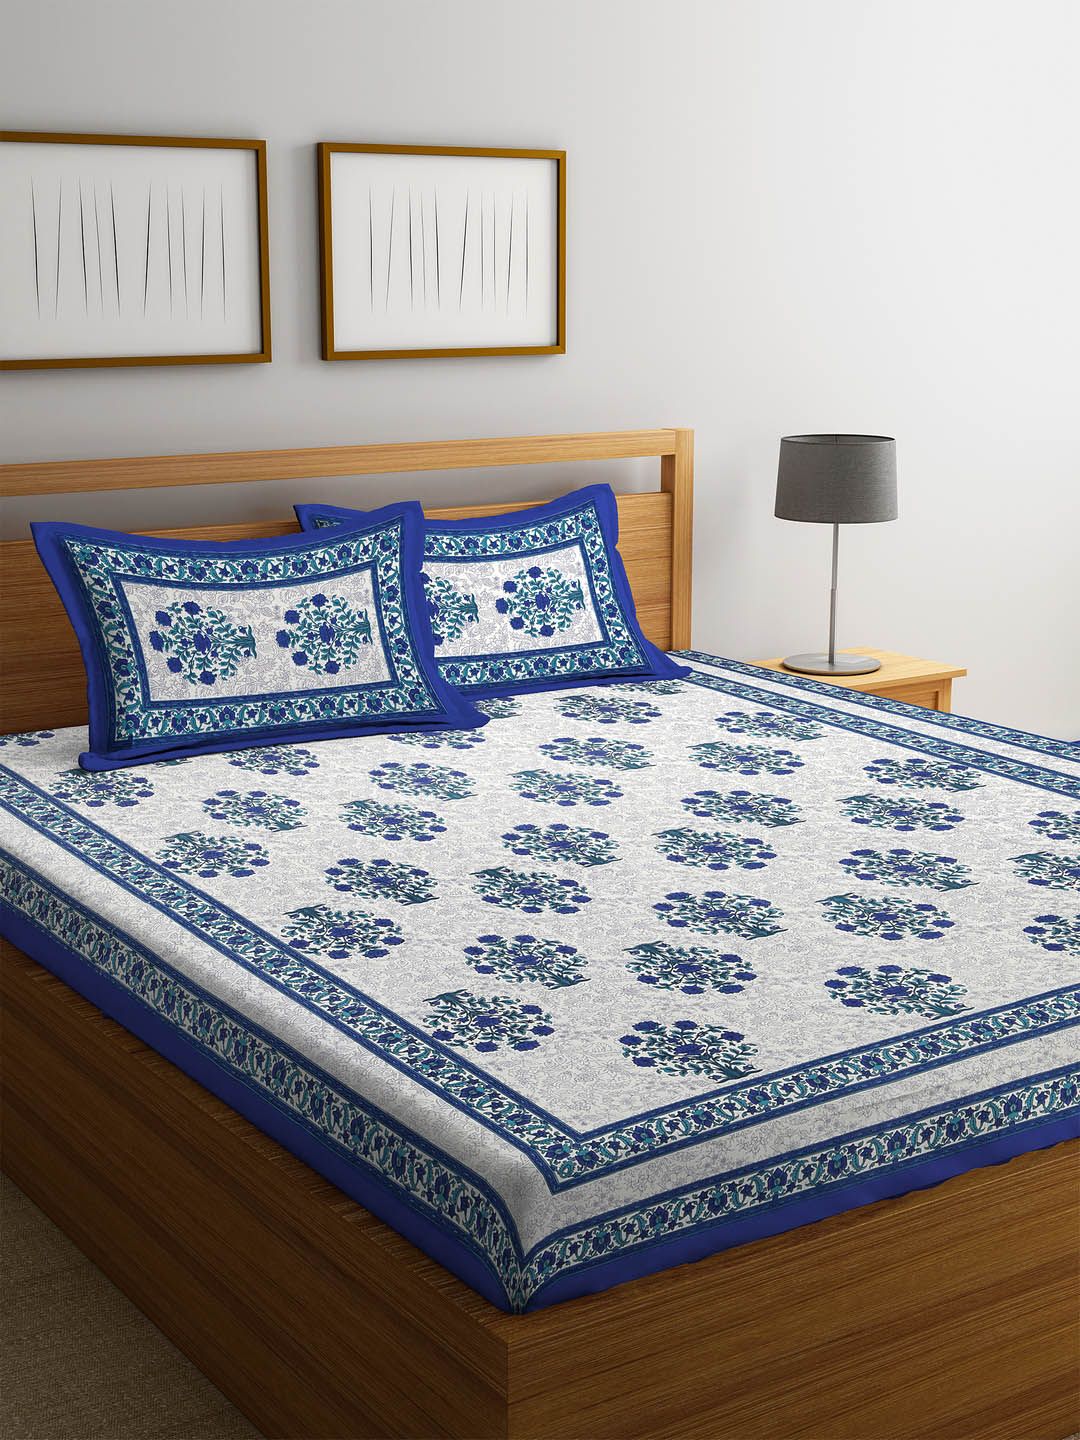 Rajasthan Decor White & Blue Floral Flat 144 TC Cotton Double Bedsheet with Pillow Covers Price in India